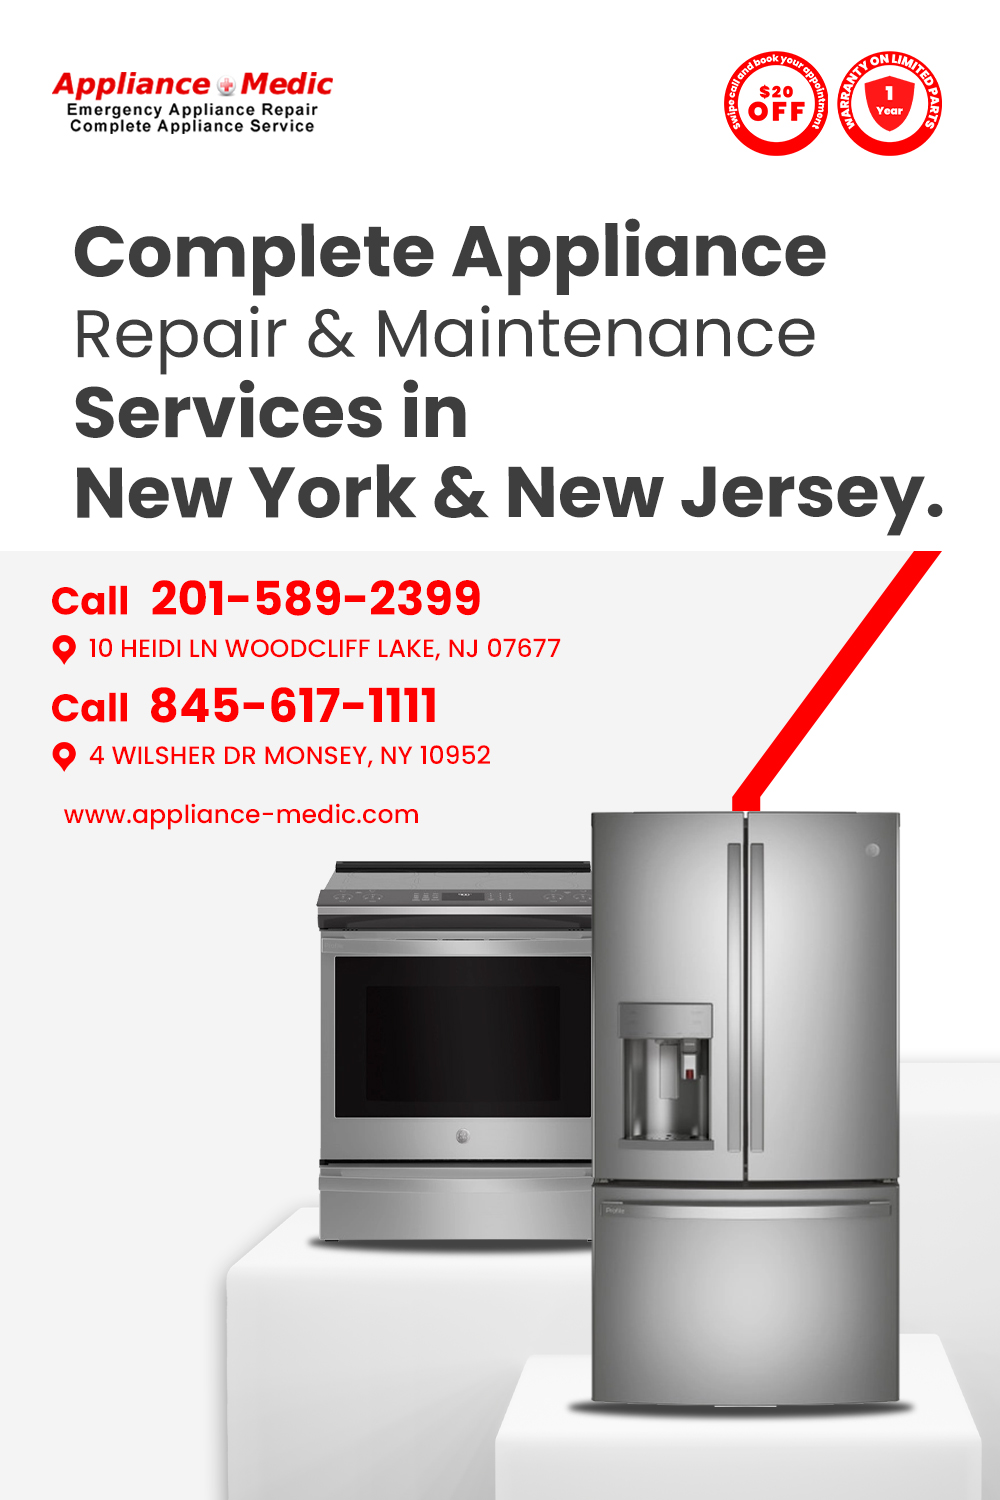 Same Day Appliance Repairs by Local Experts - Appliance Medic